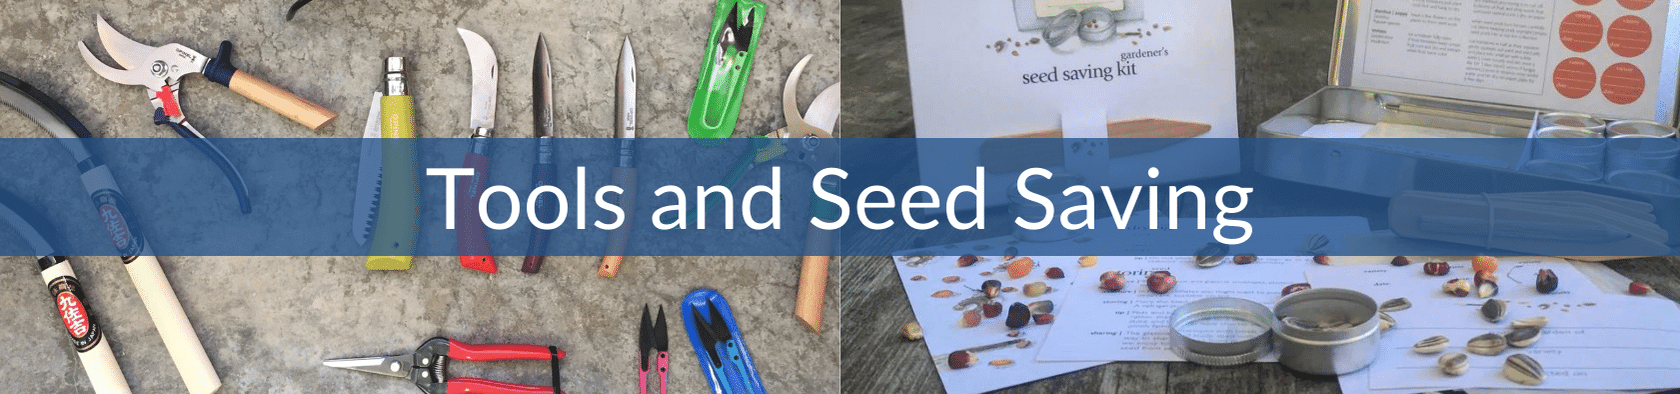 Tools and Seed Saving (2).png__PID:94aea452-45ad-45fb-a40b-dc6e386d889d